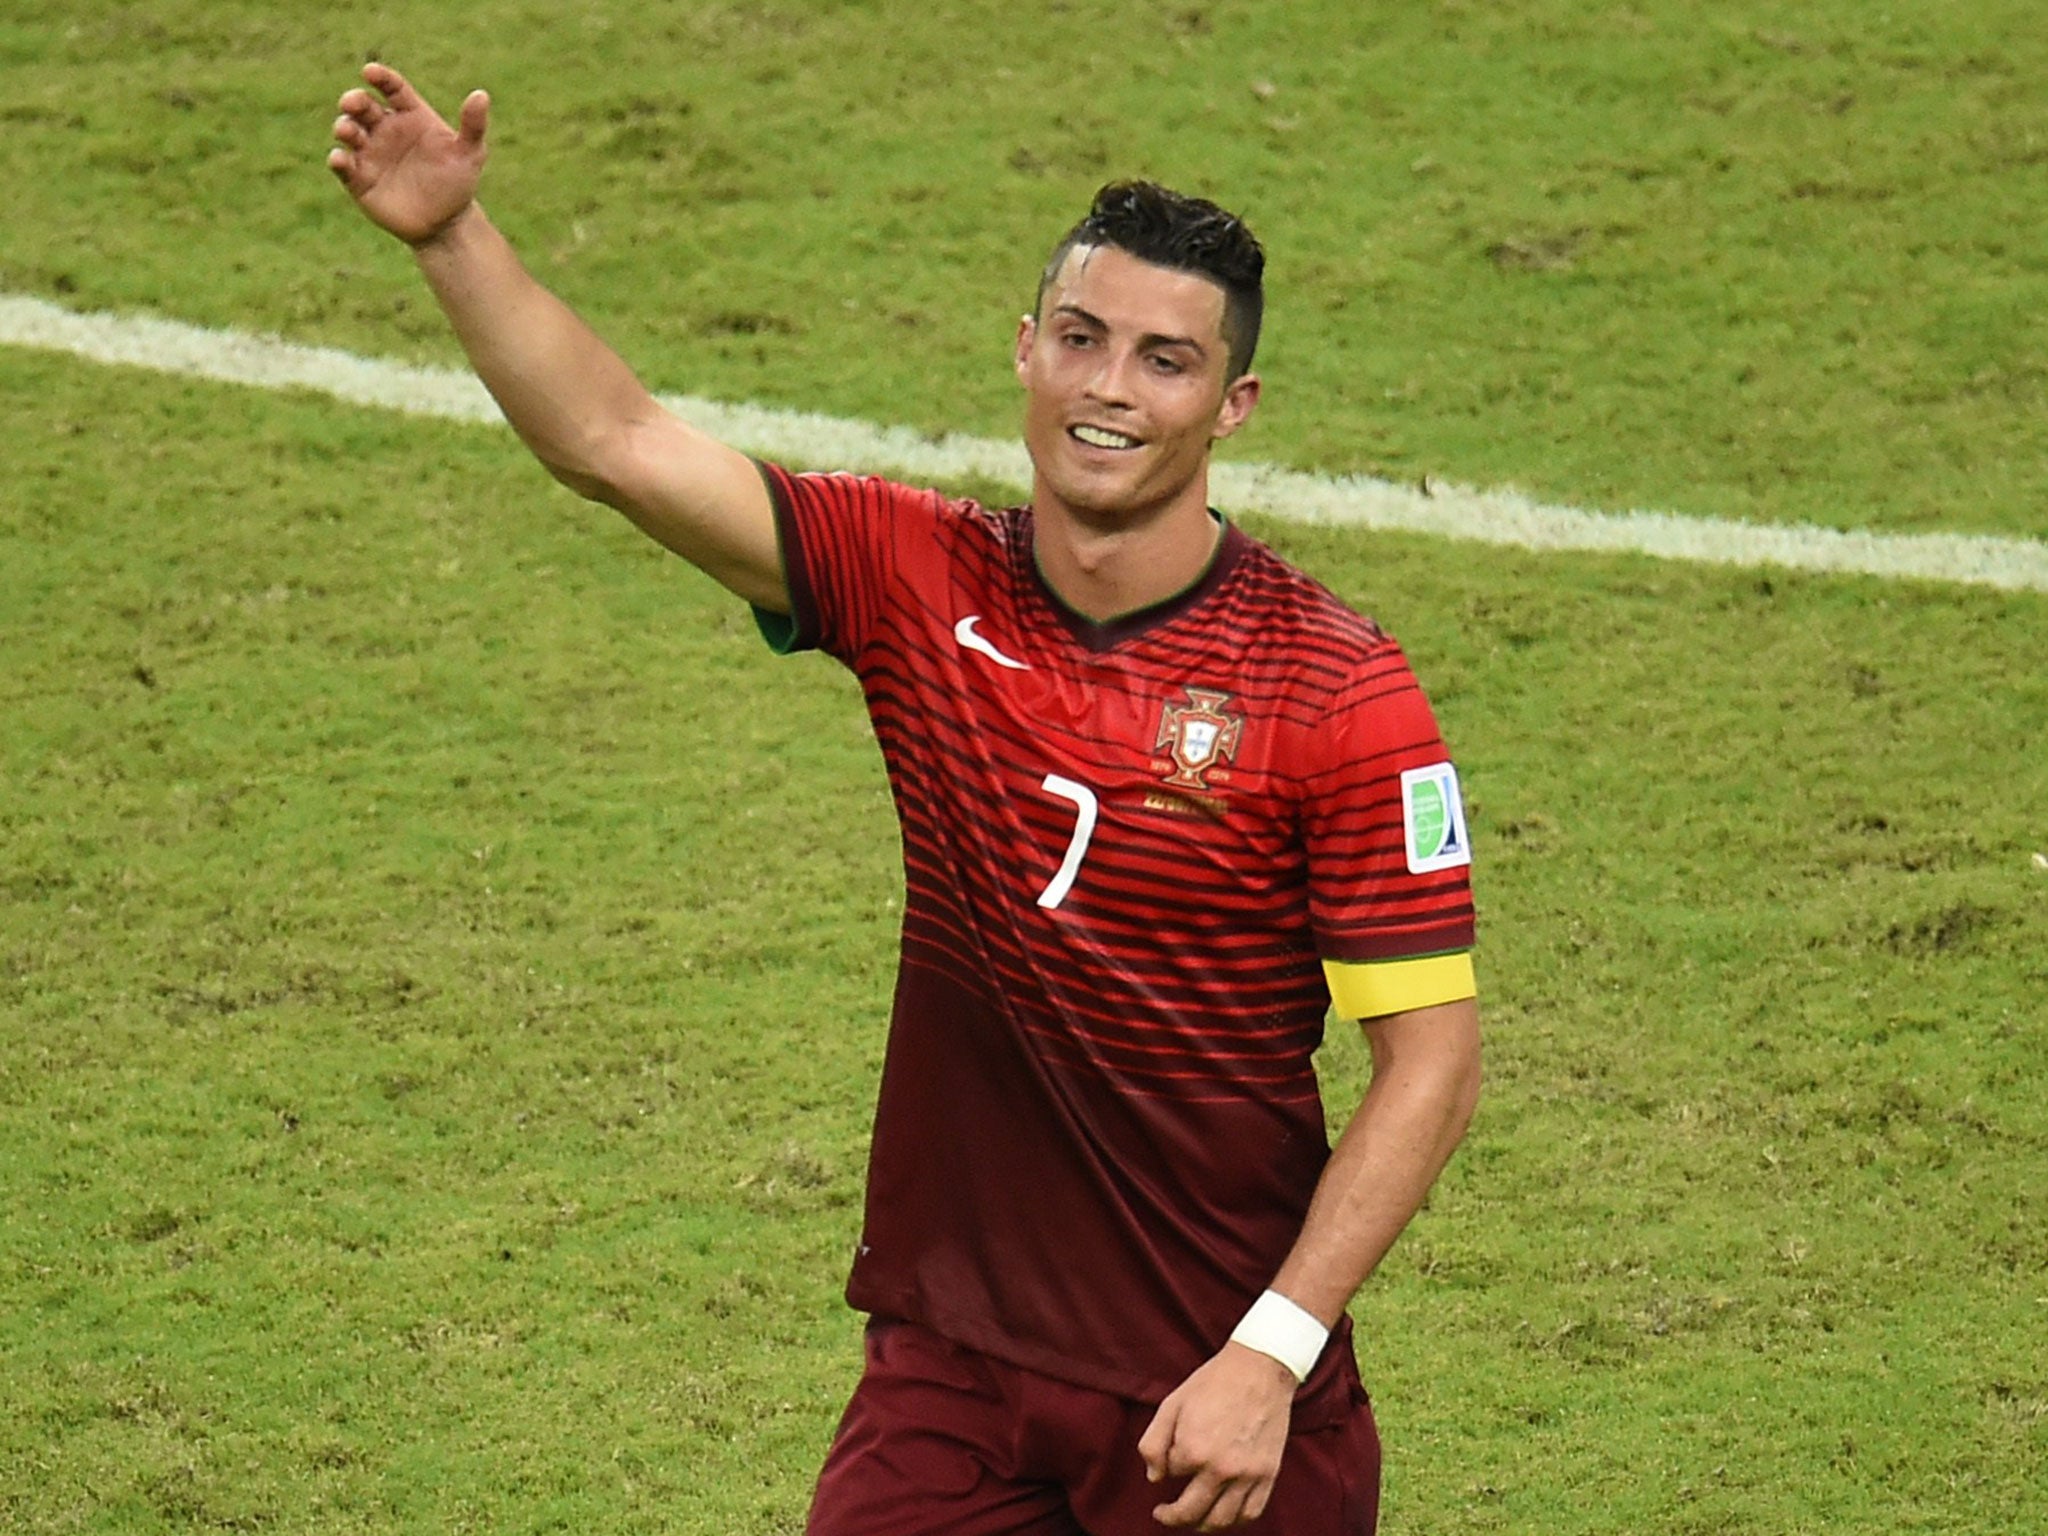 Cristiano Ronaldo looks relieved at the final whistle